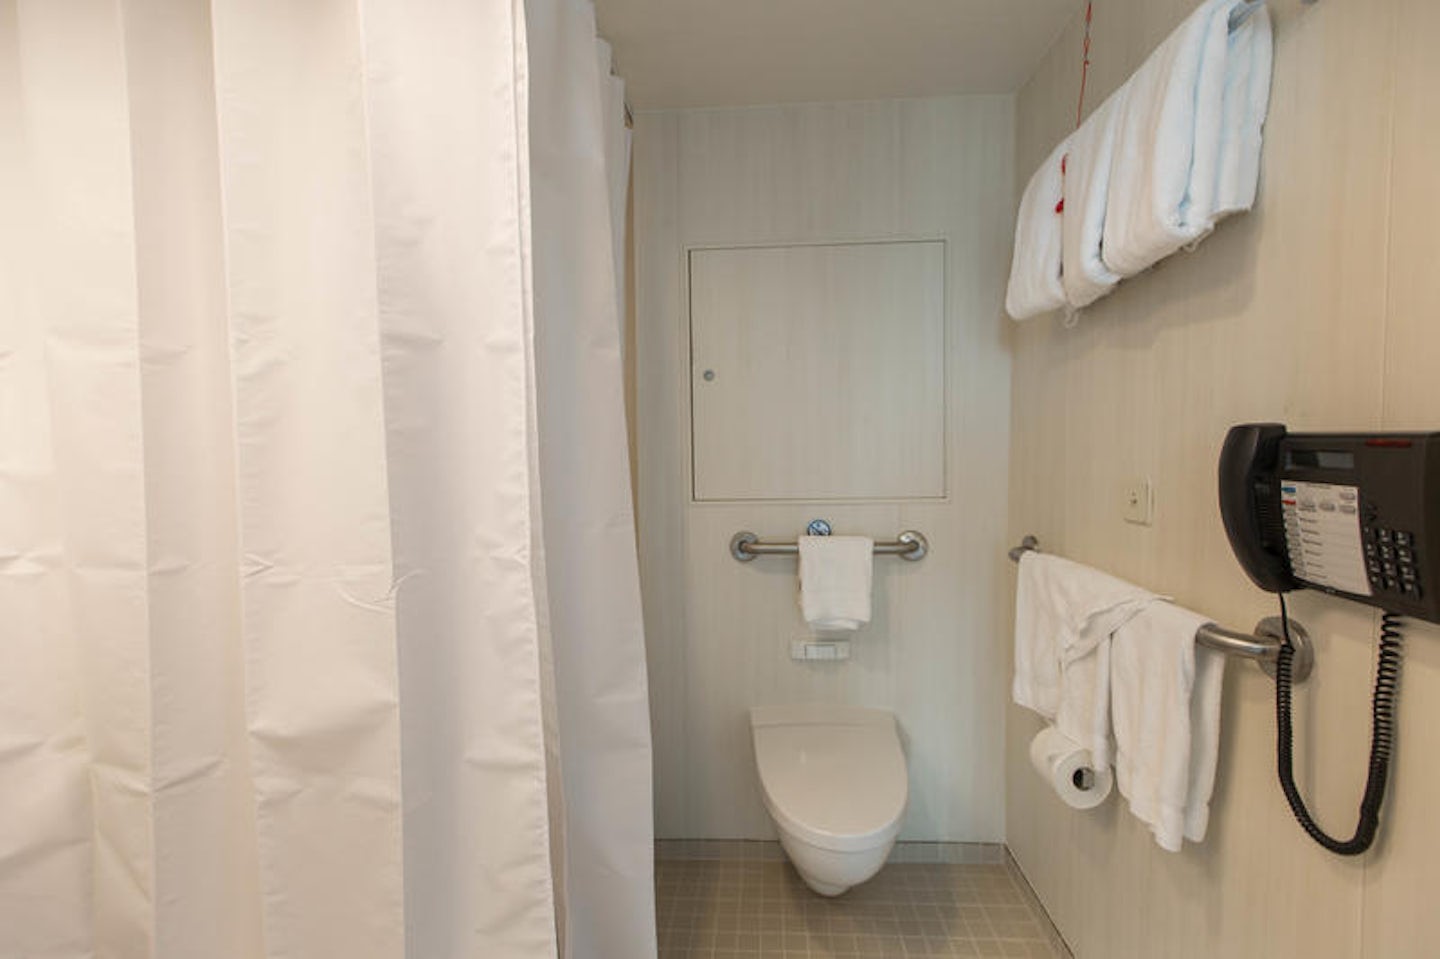 The Accessible Panoramic Oceanview Cabin on Liberty of the Seas